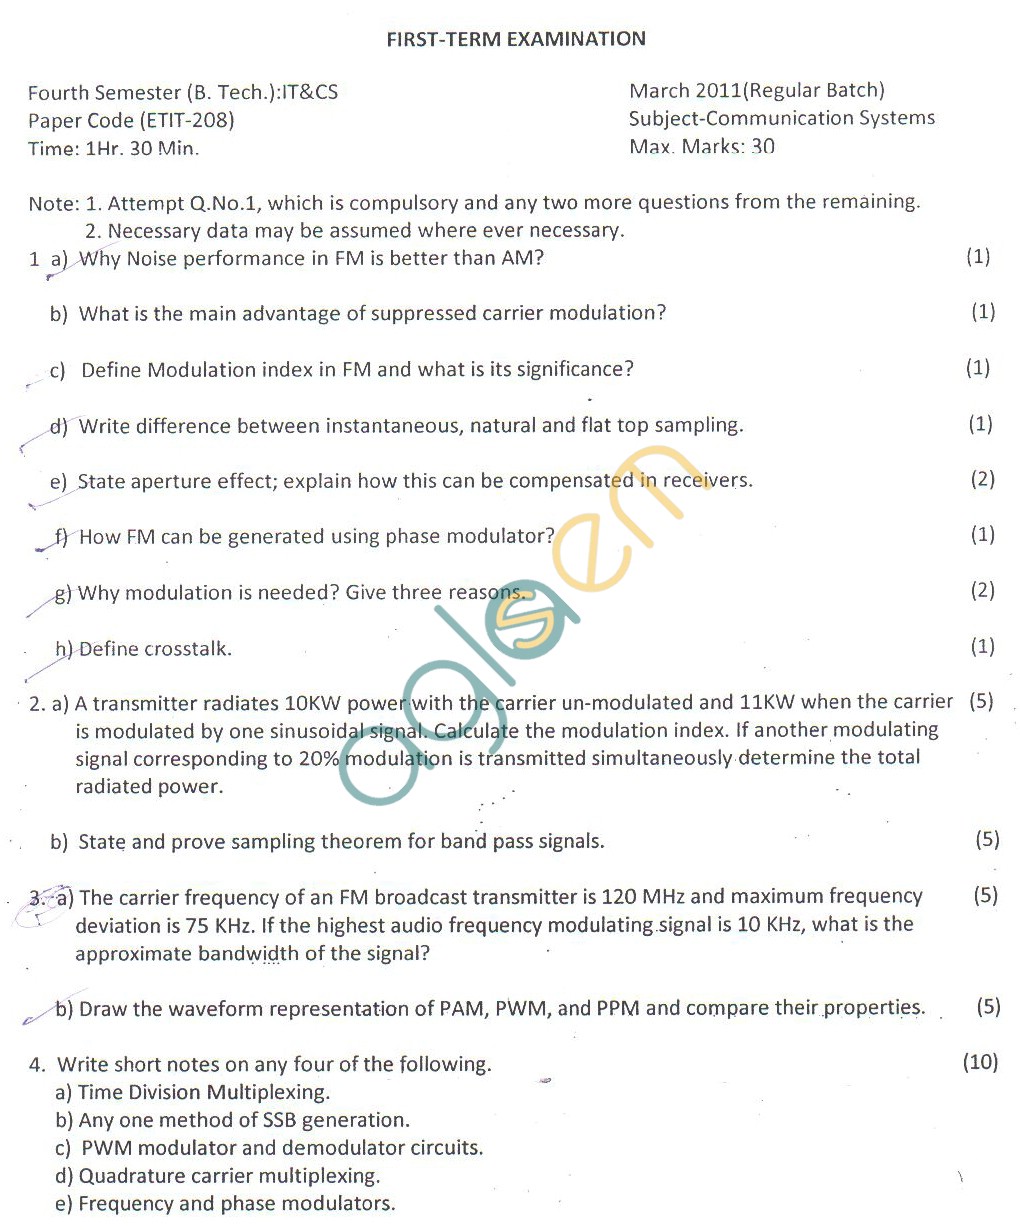 GGSIPU Question Papers Fourth Semester – First Term 2011 – ETIT-208